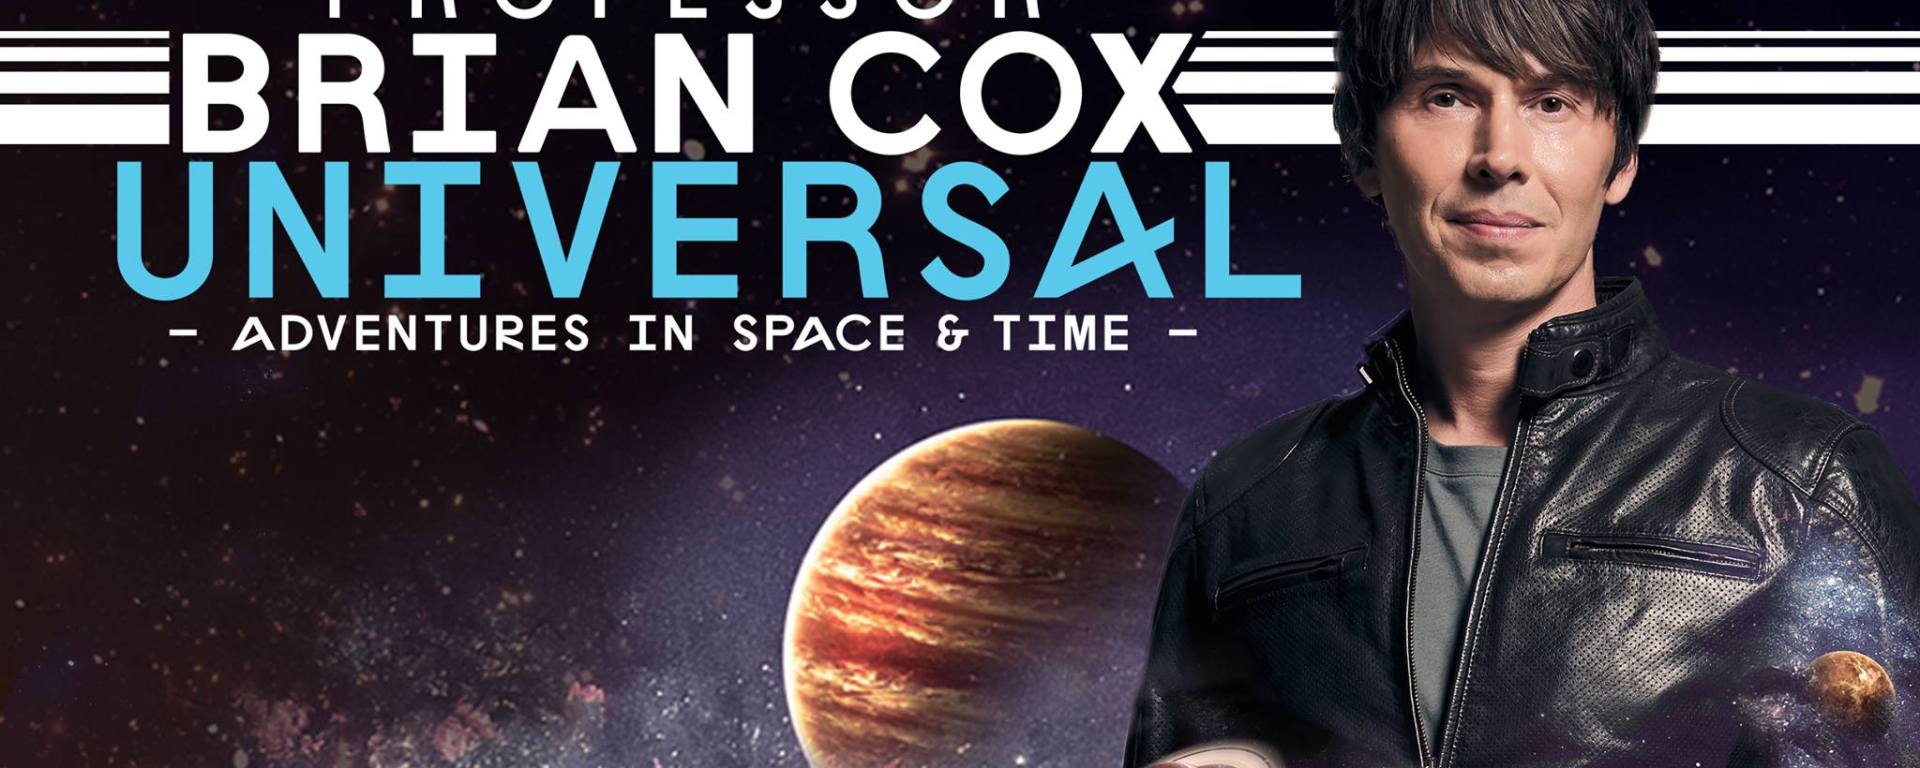 Professor Brian Cox will take us on “Adventures In Space and Time